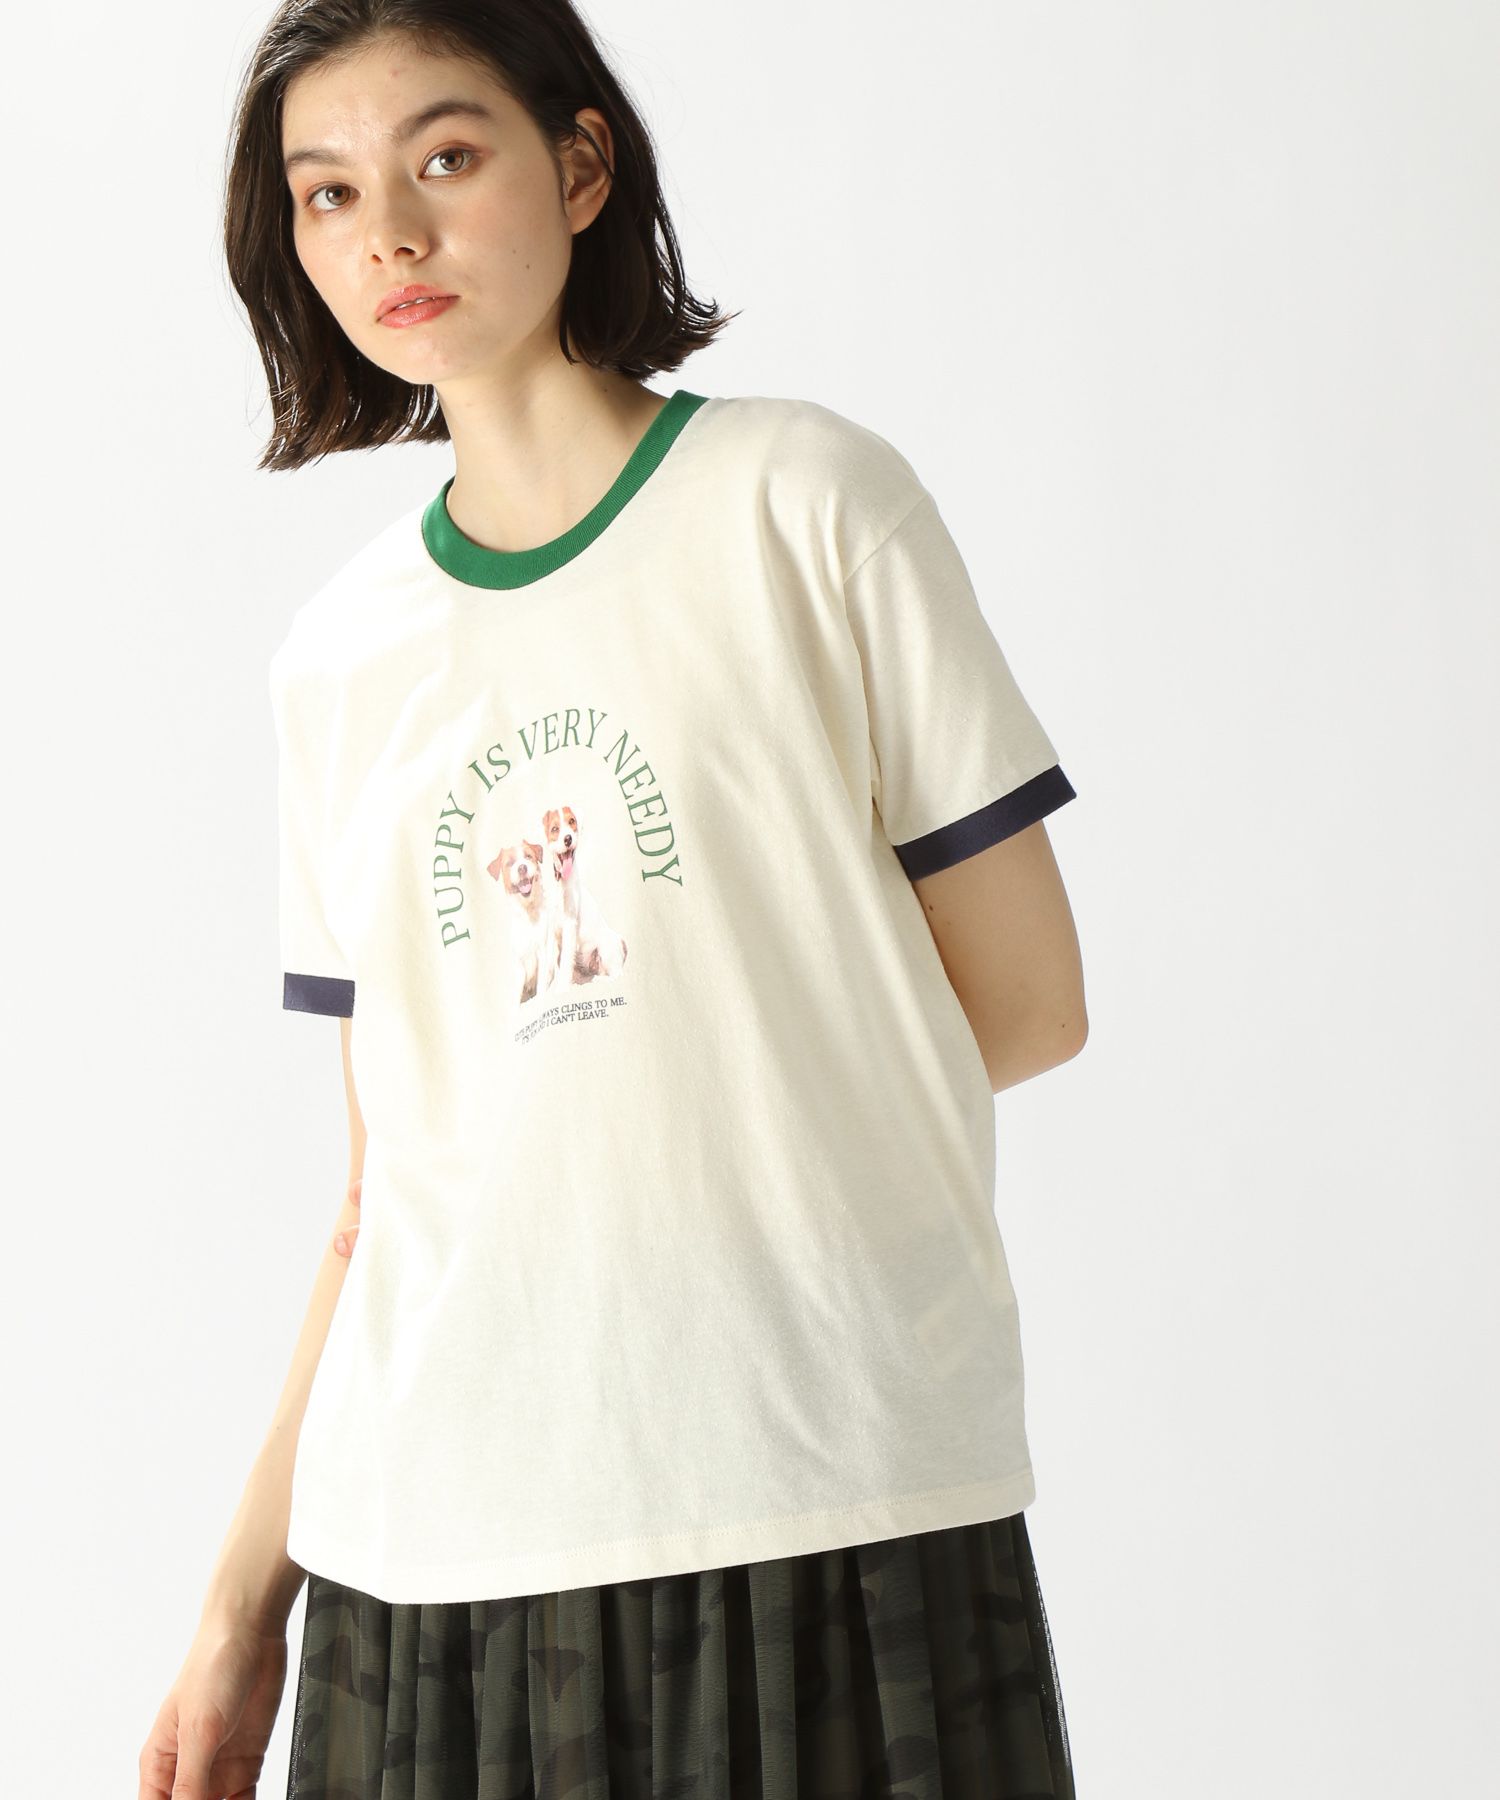 niko and ロゴ Tシャツ - トップス